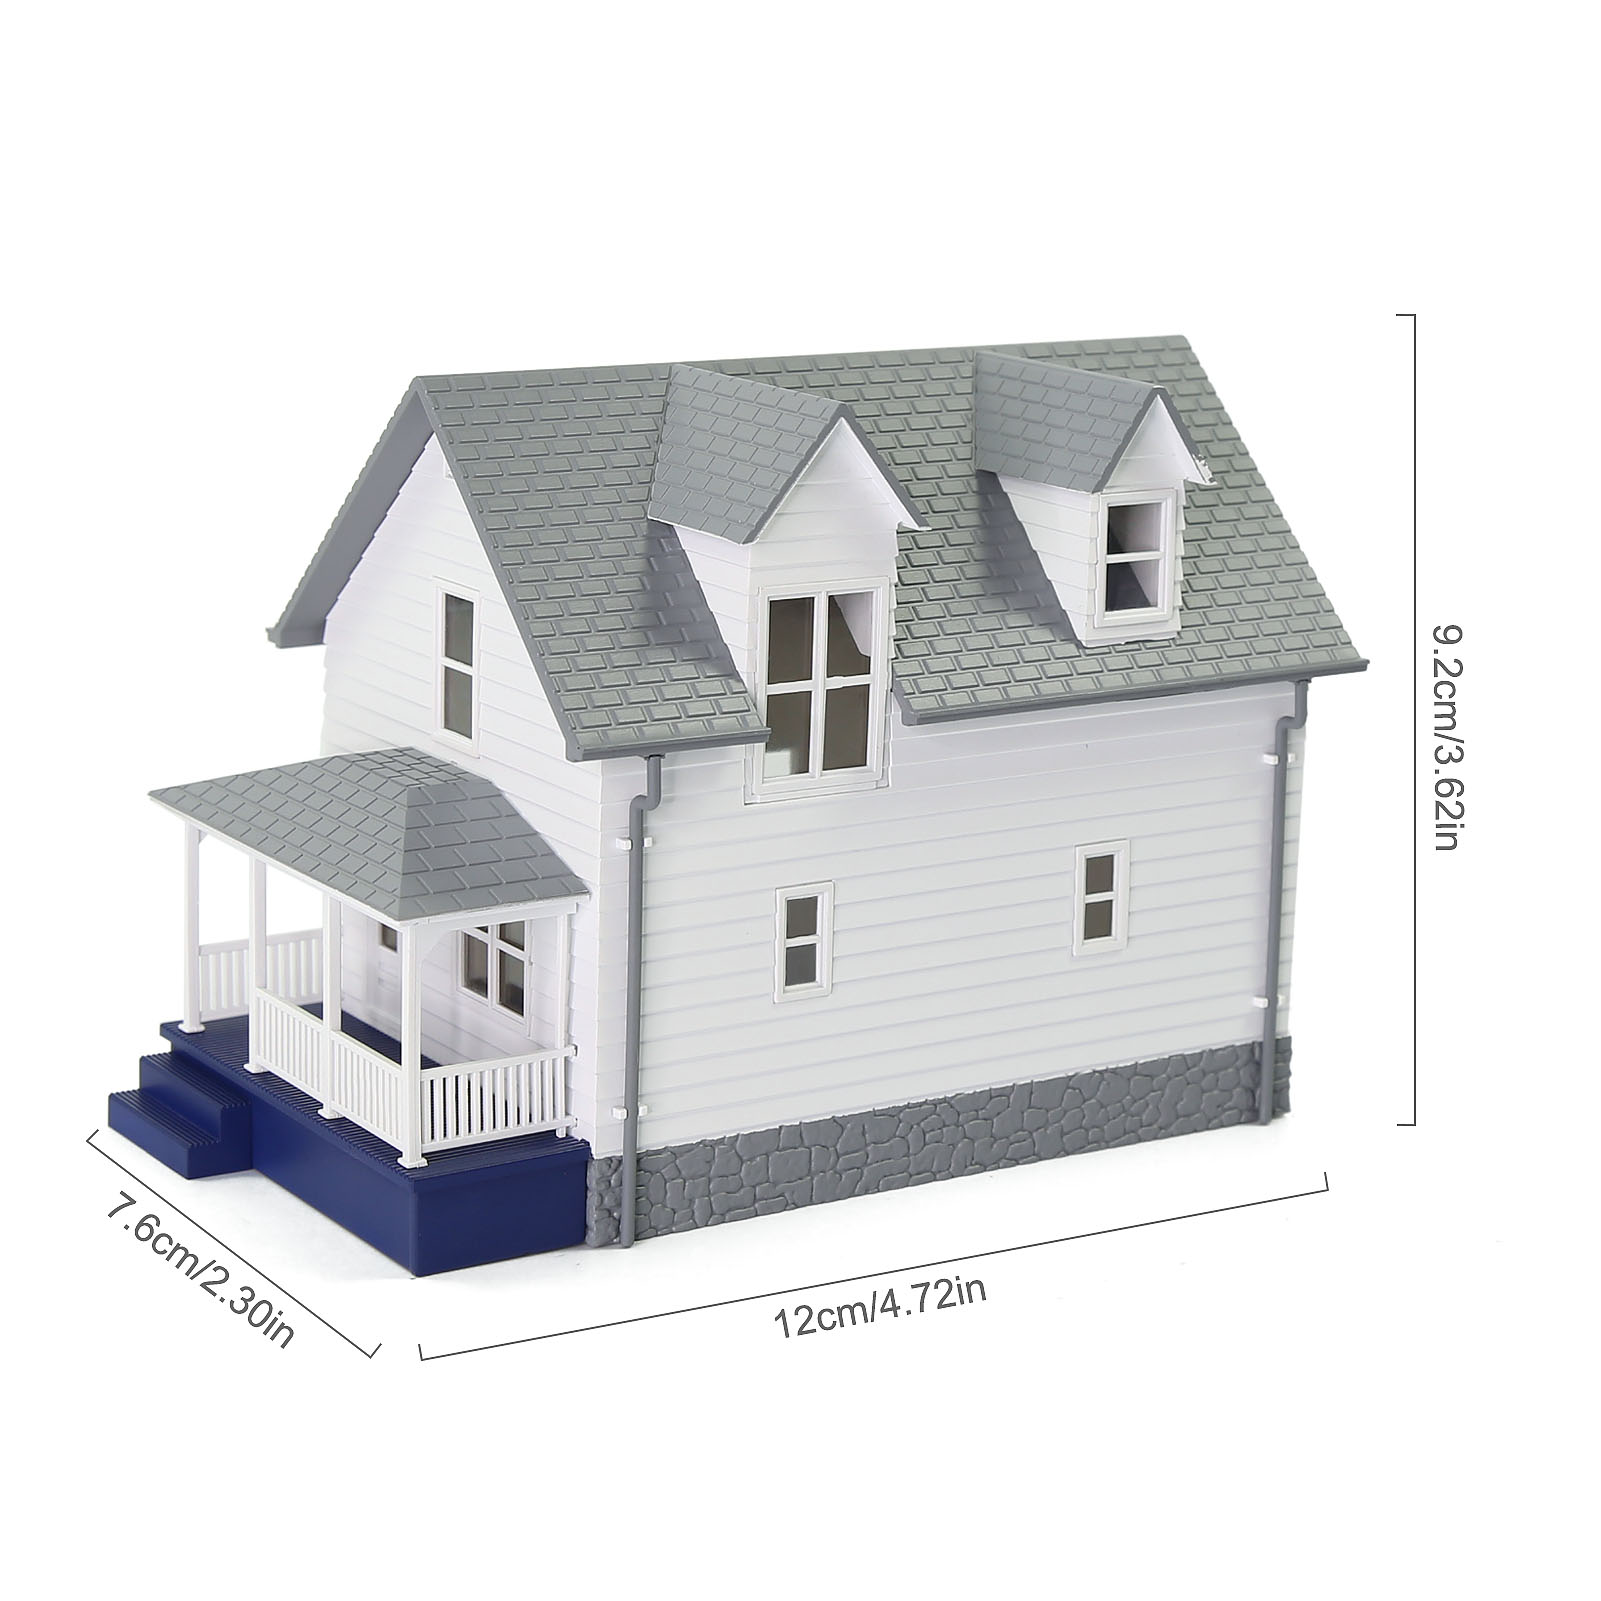 DOMUS-KITS Kits40601 Scale 1:87 Actual Vilomara Houses Model - Kits40601  Scale 1:87 Actual Vilomara Houses Model . shop for DOMUS-KITS products in  India.